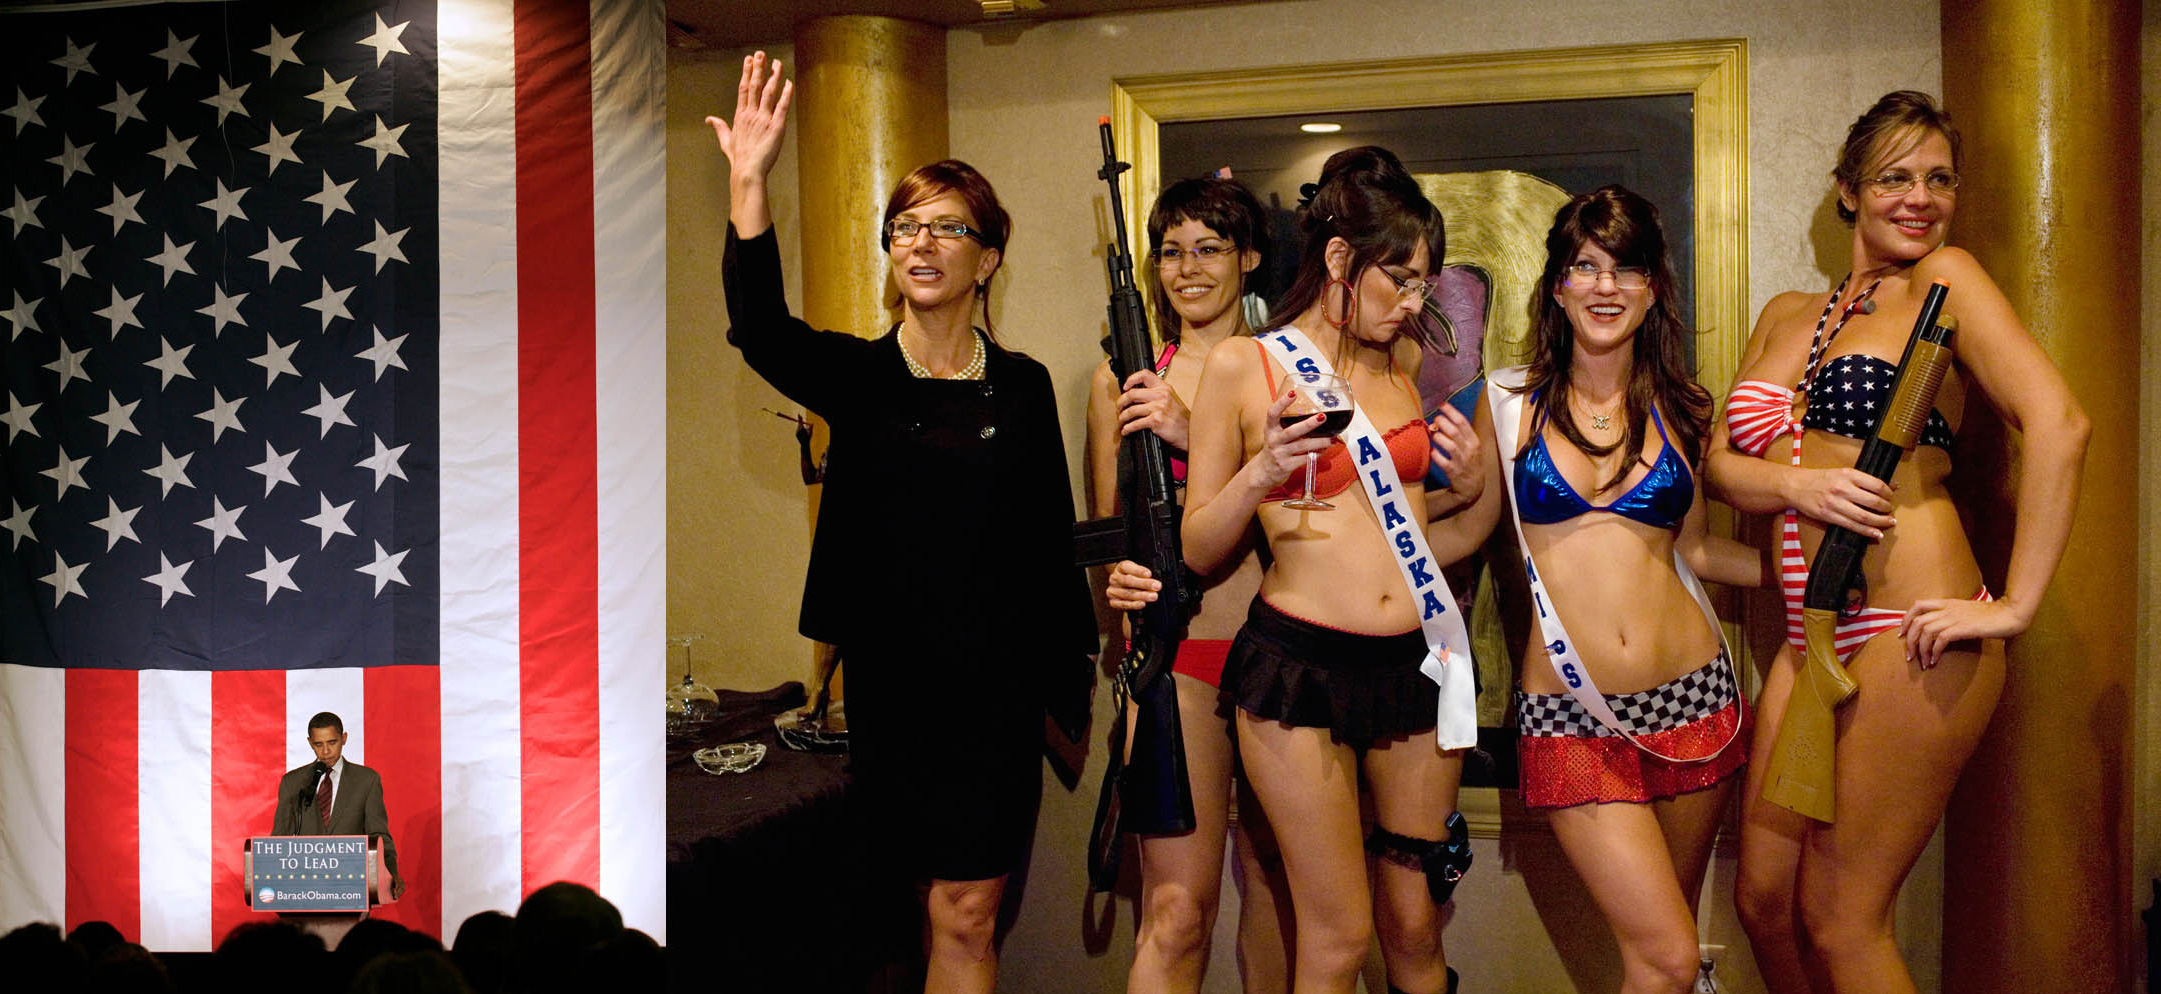 L: Barack Obama Rally / Sarah Palin Lookalike Strippers - Tiffany Brown And...